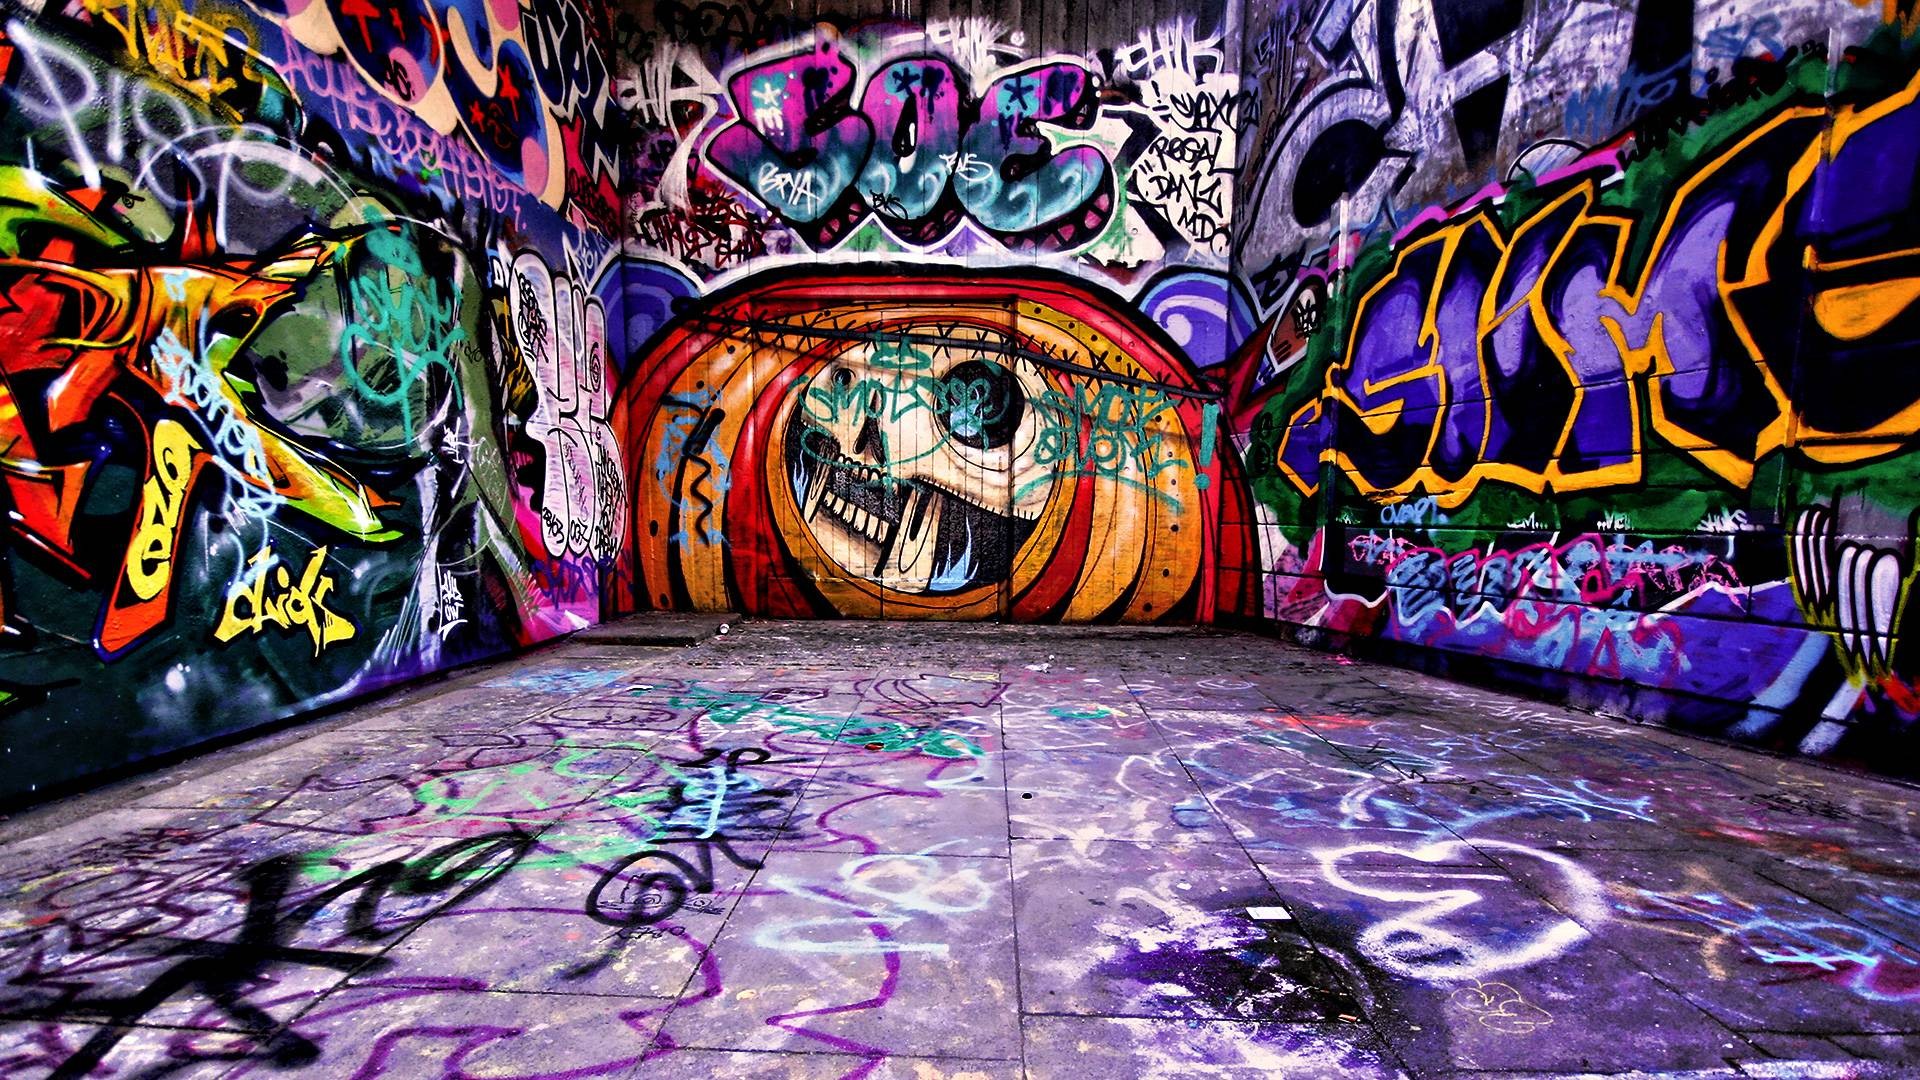 Street Art Desktop Backgrounds HD with image resolution 1920x1080 pixel. You can use this wallpaper as background for your desktop Computer Screensavers, Android or iPhone smartphones